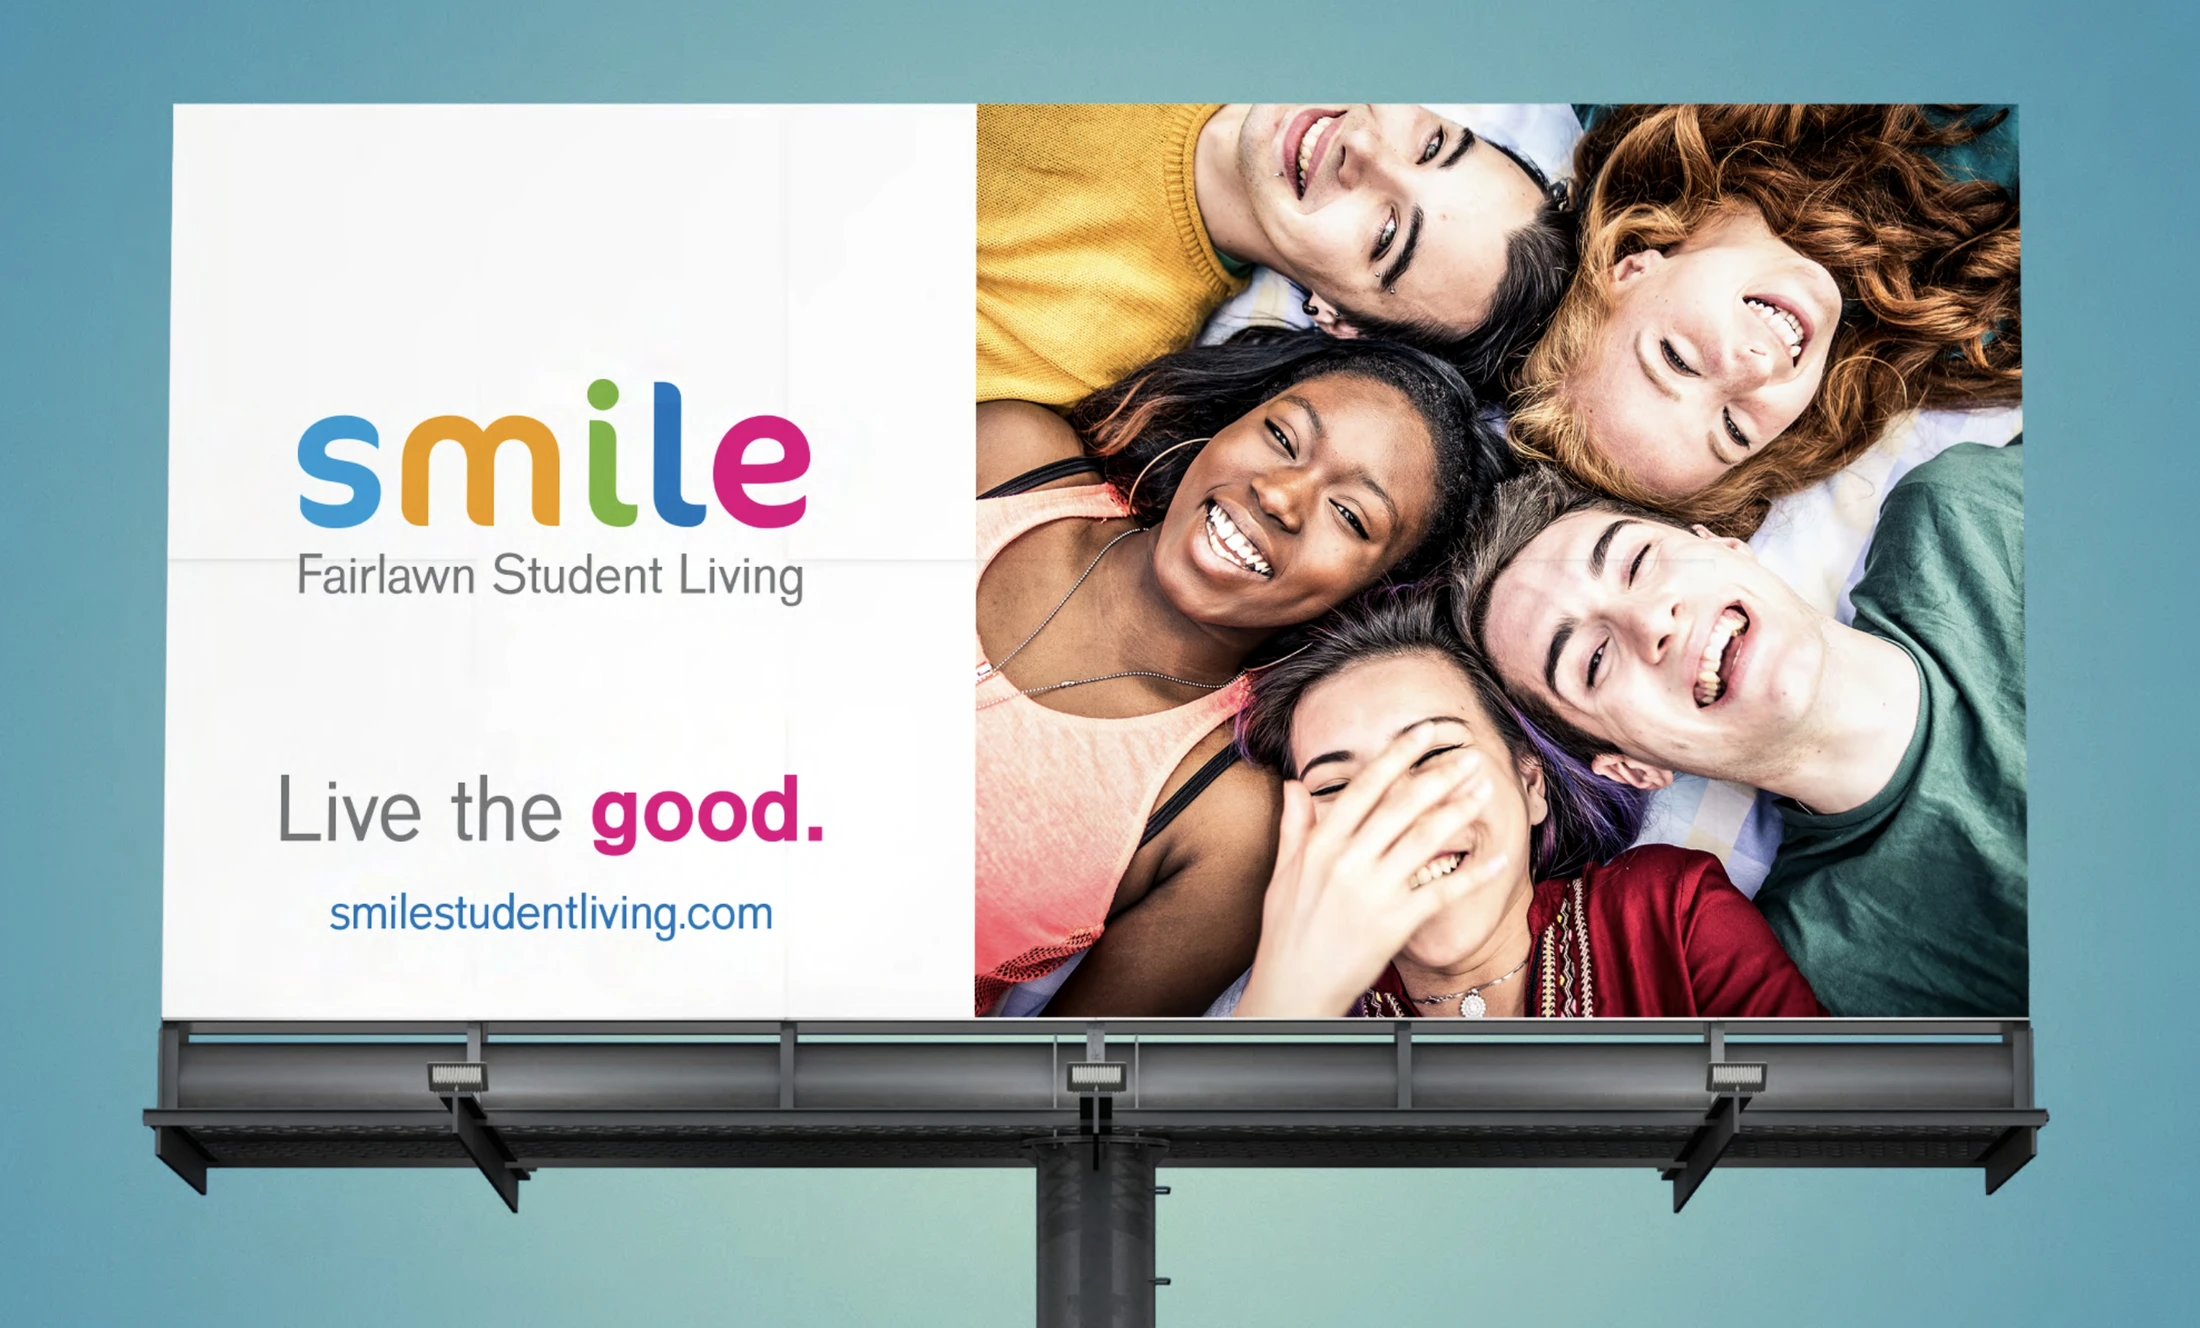 A billboard with the word smile on it.